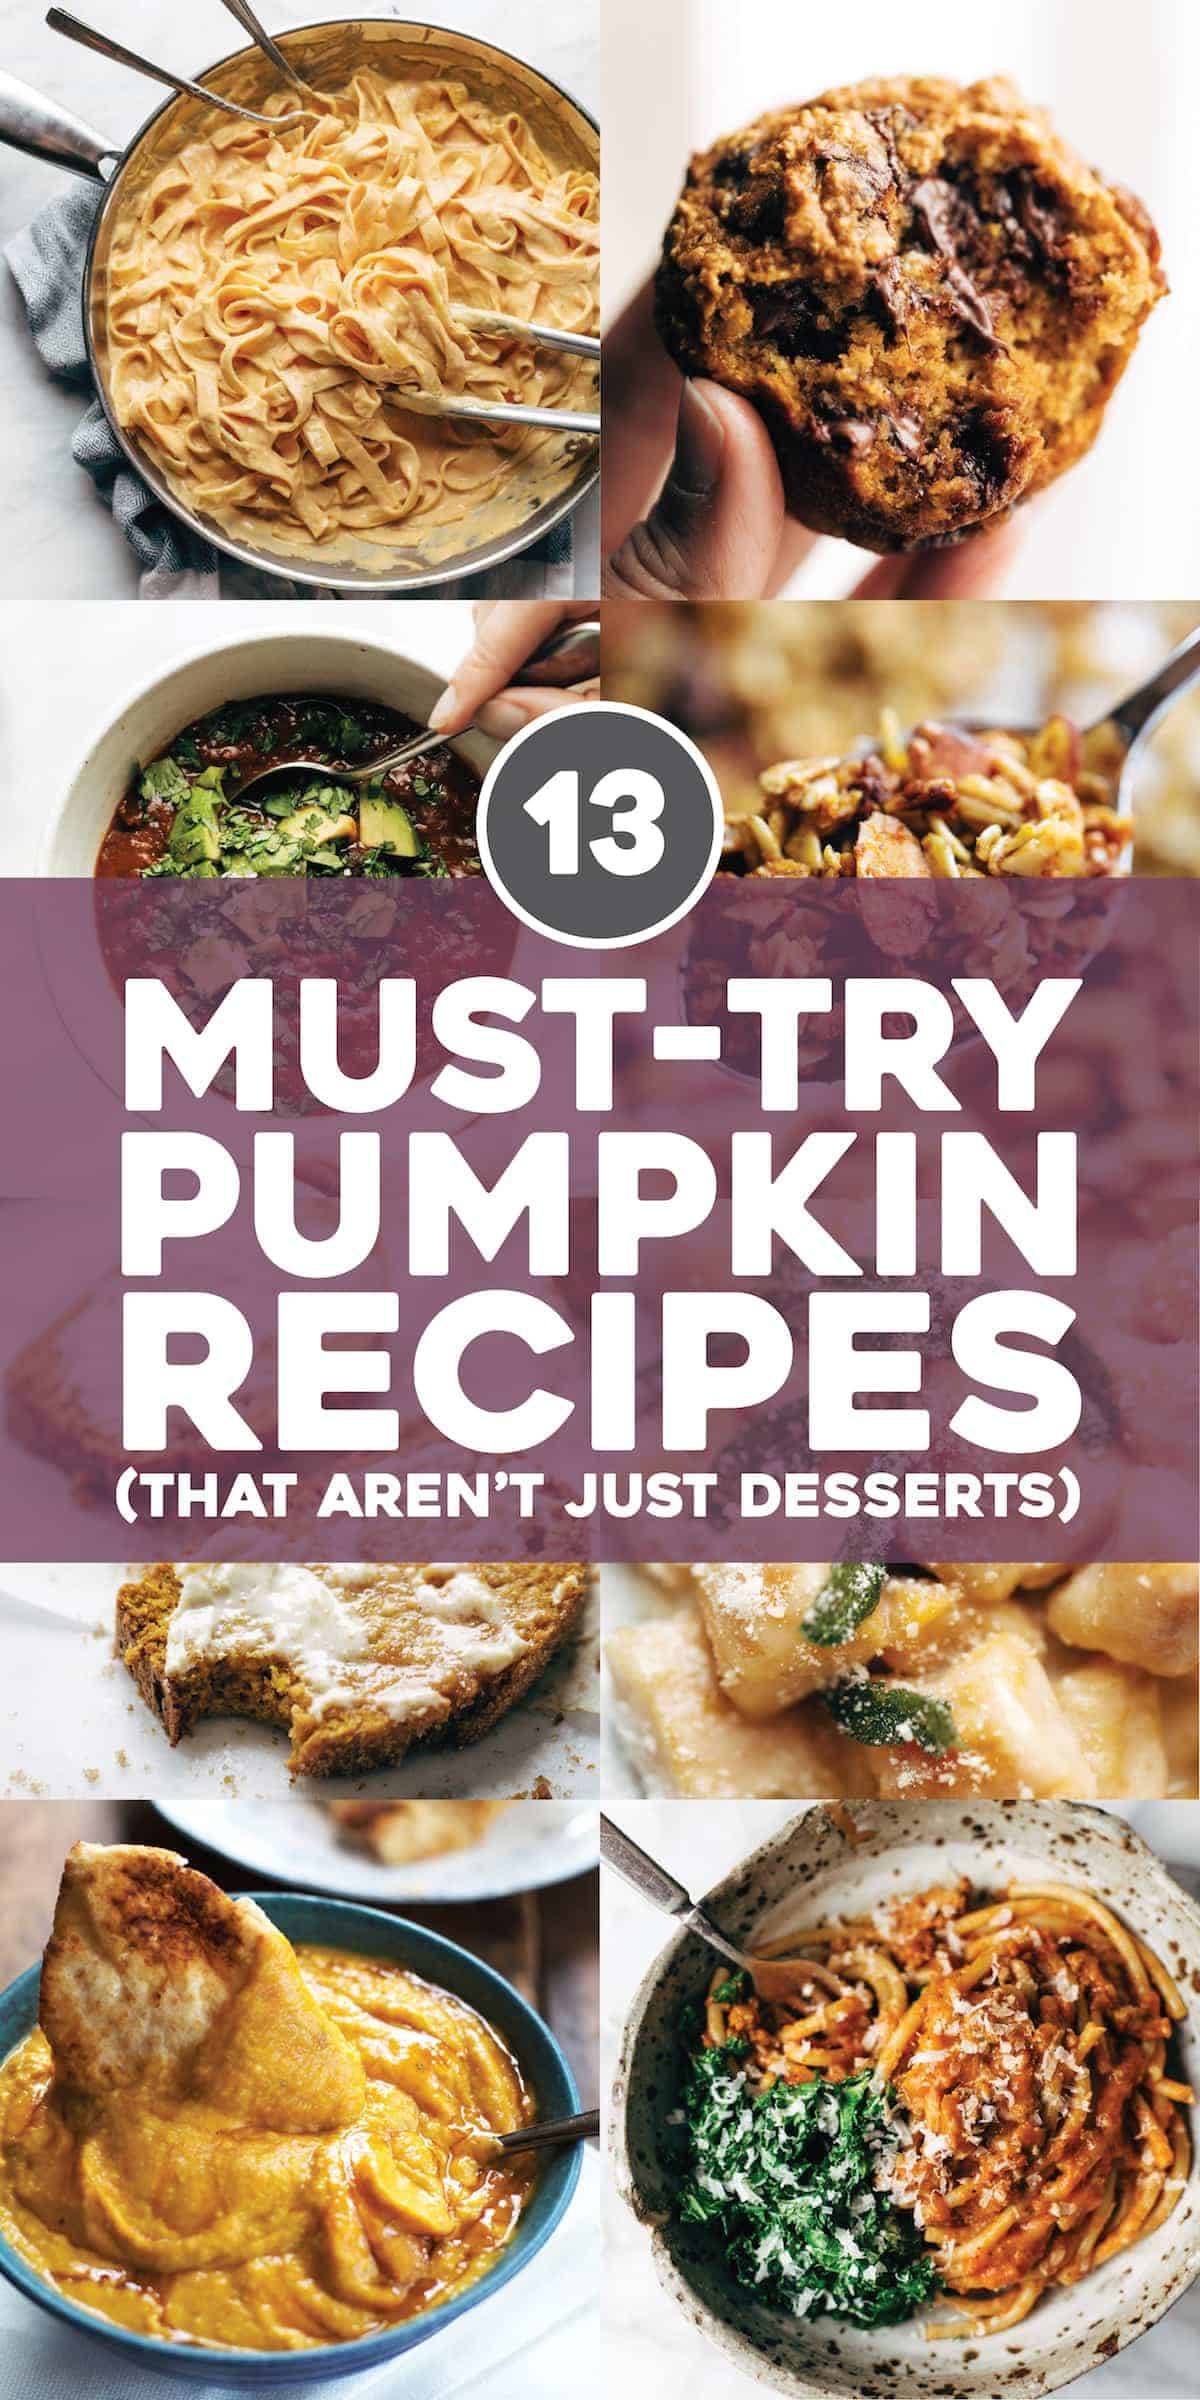 Pumpkin recipes in bowls and pans.